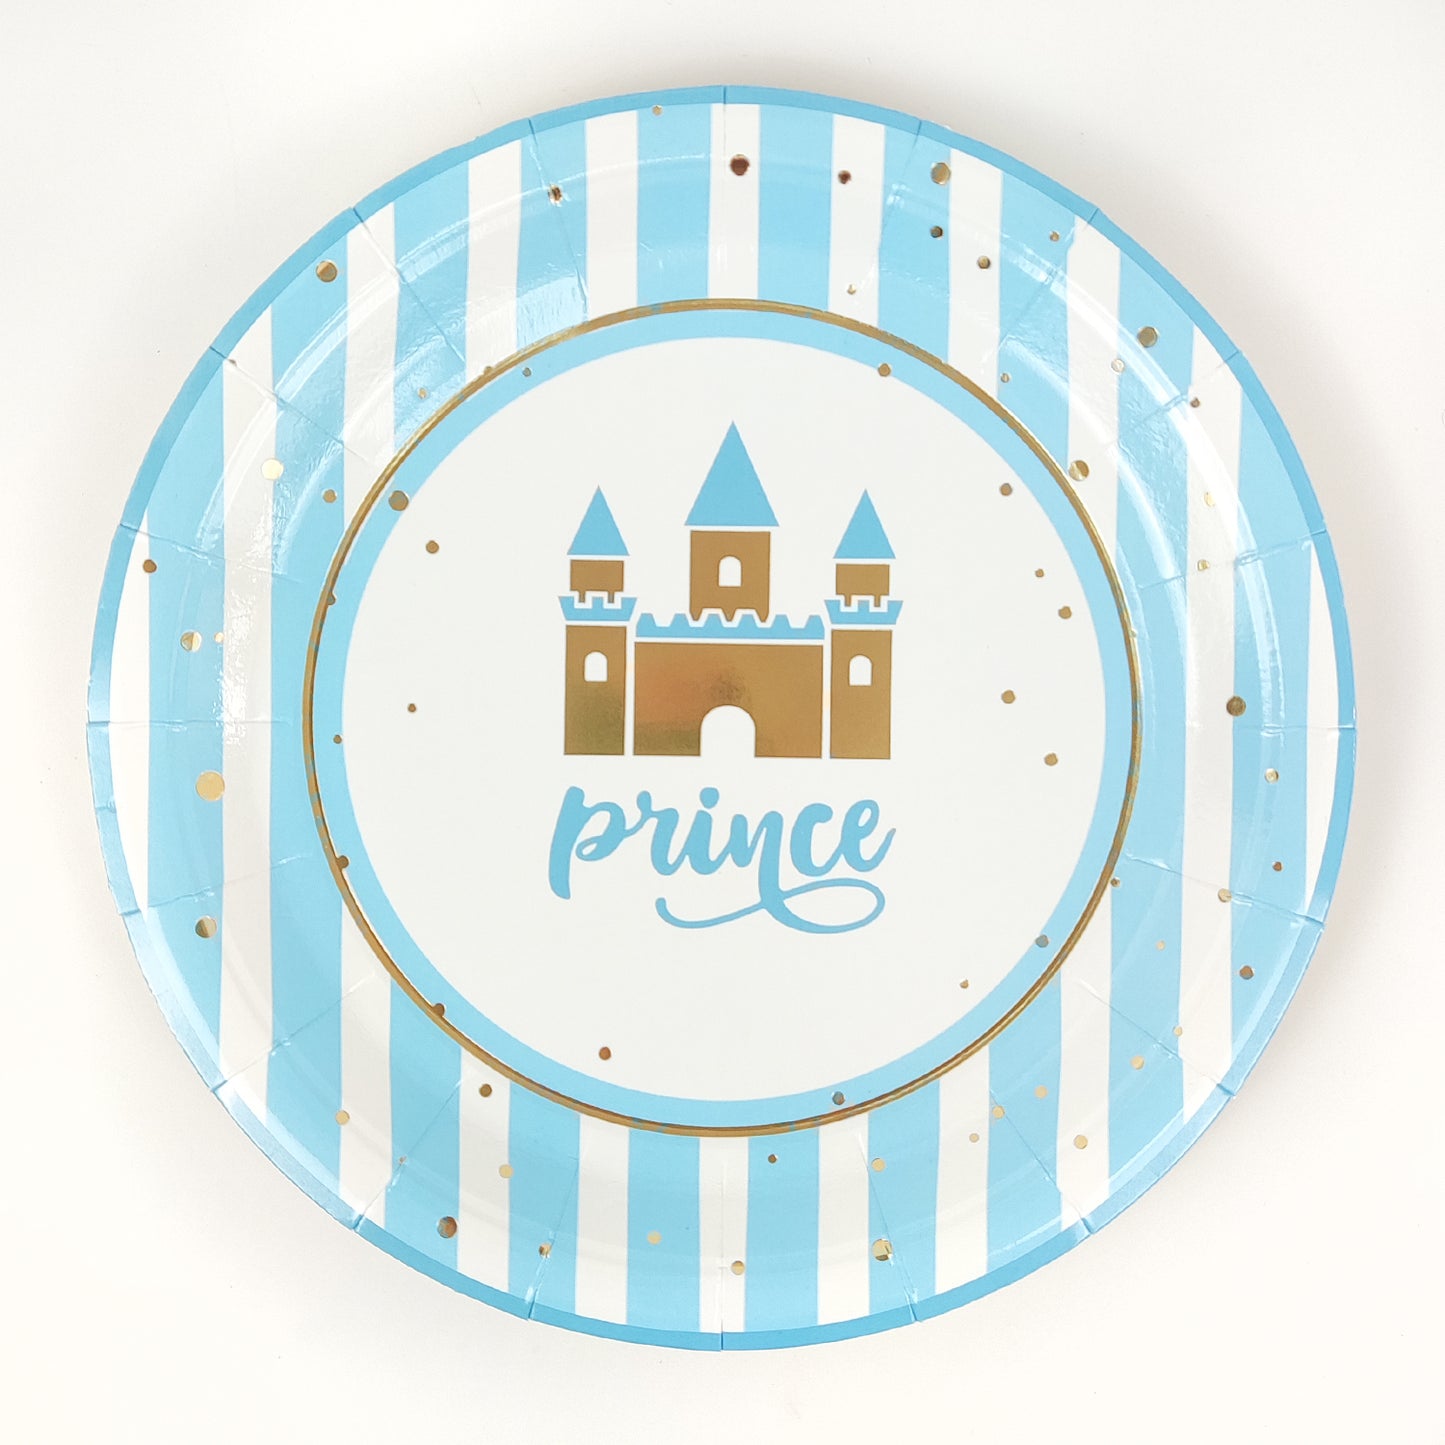 Prince Design Paper Tableware Set Disposable Party Plate Cup Napkin for Baby Shower Boy's Birthday